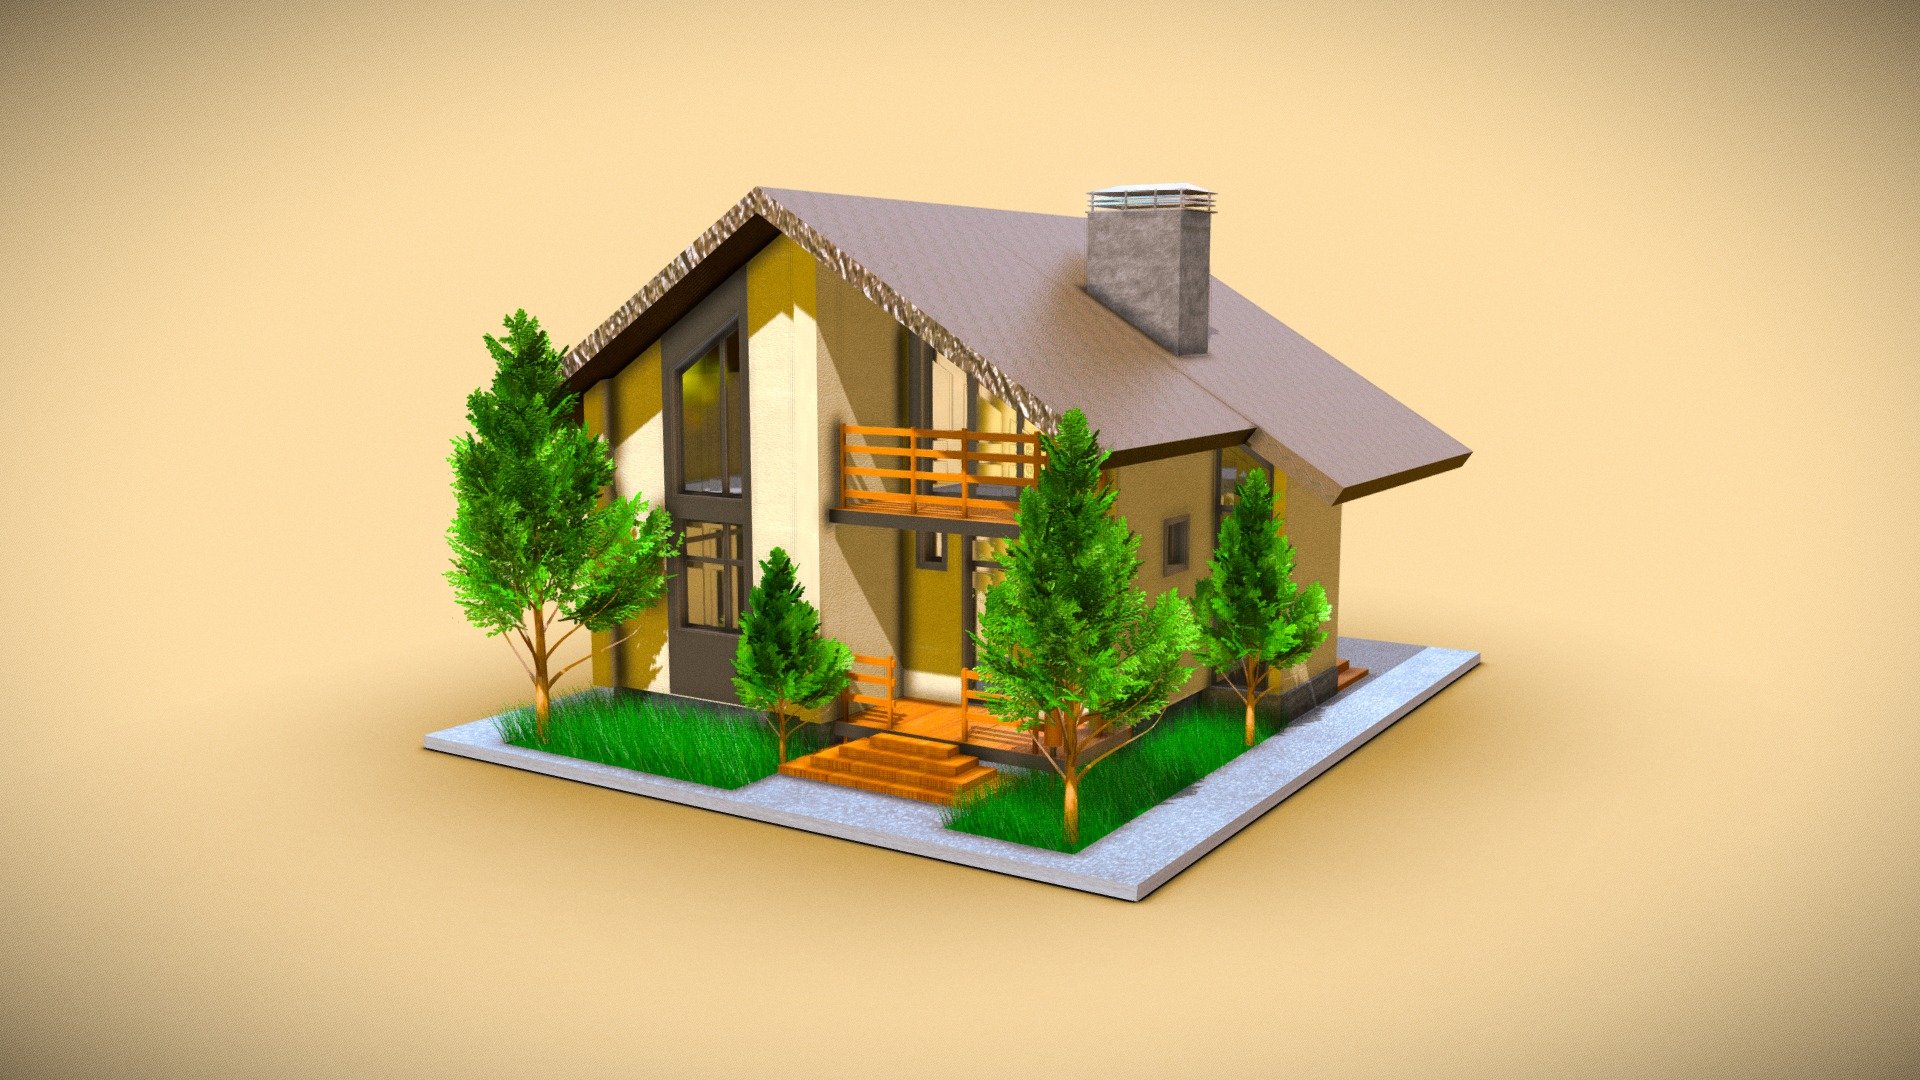 =============================================
Cartoon moderne house Scene
=============================================
High Quality Cartoon moderne house Scene 
Ready for your Movies, TV, advertising, etc. 

File Format:

Blender 2022 | Native Format
FBX | Multi Format

Model:

Clean topology based on quads 

It also contains a lot of high-detailed Street elements
The groups named clearly in the outline and corresponding to each display layer

Texture and shader:

All models are completely UVunwrapped
Nearly 90% of models use PBR textures
Texture format is jpg and png

Texture resolution of the building models is 4K (including multi-tiled UV) 

Render:

The preview images are rendered with cycle in blender  2022.
Lights and Render setting are included in the blender scene.
Just open and render.

Note:

The texture file is a bit large, so I compressed the texture into several volumes
please pay attention when decompressing it.

turbosqued :
link :  https://www.artstation.com/artwork/nEvd1r - 3D model moderne-house - Buy Royalty Free 3D model by IMAKTeck-3D (@Lynda.Tinhinane) 3d model